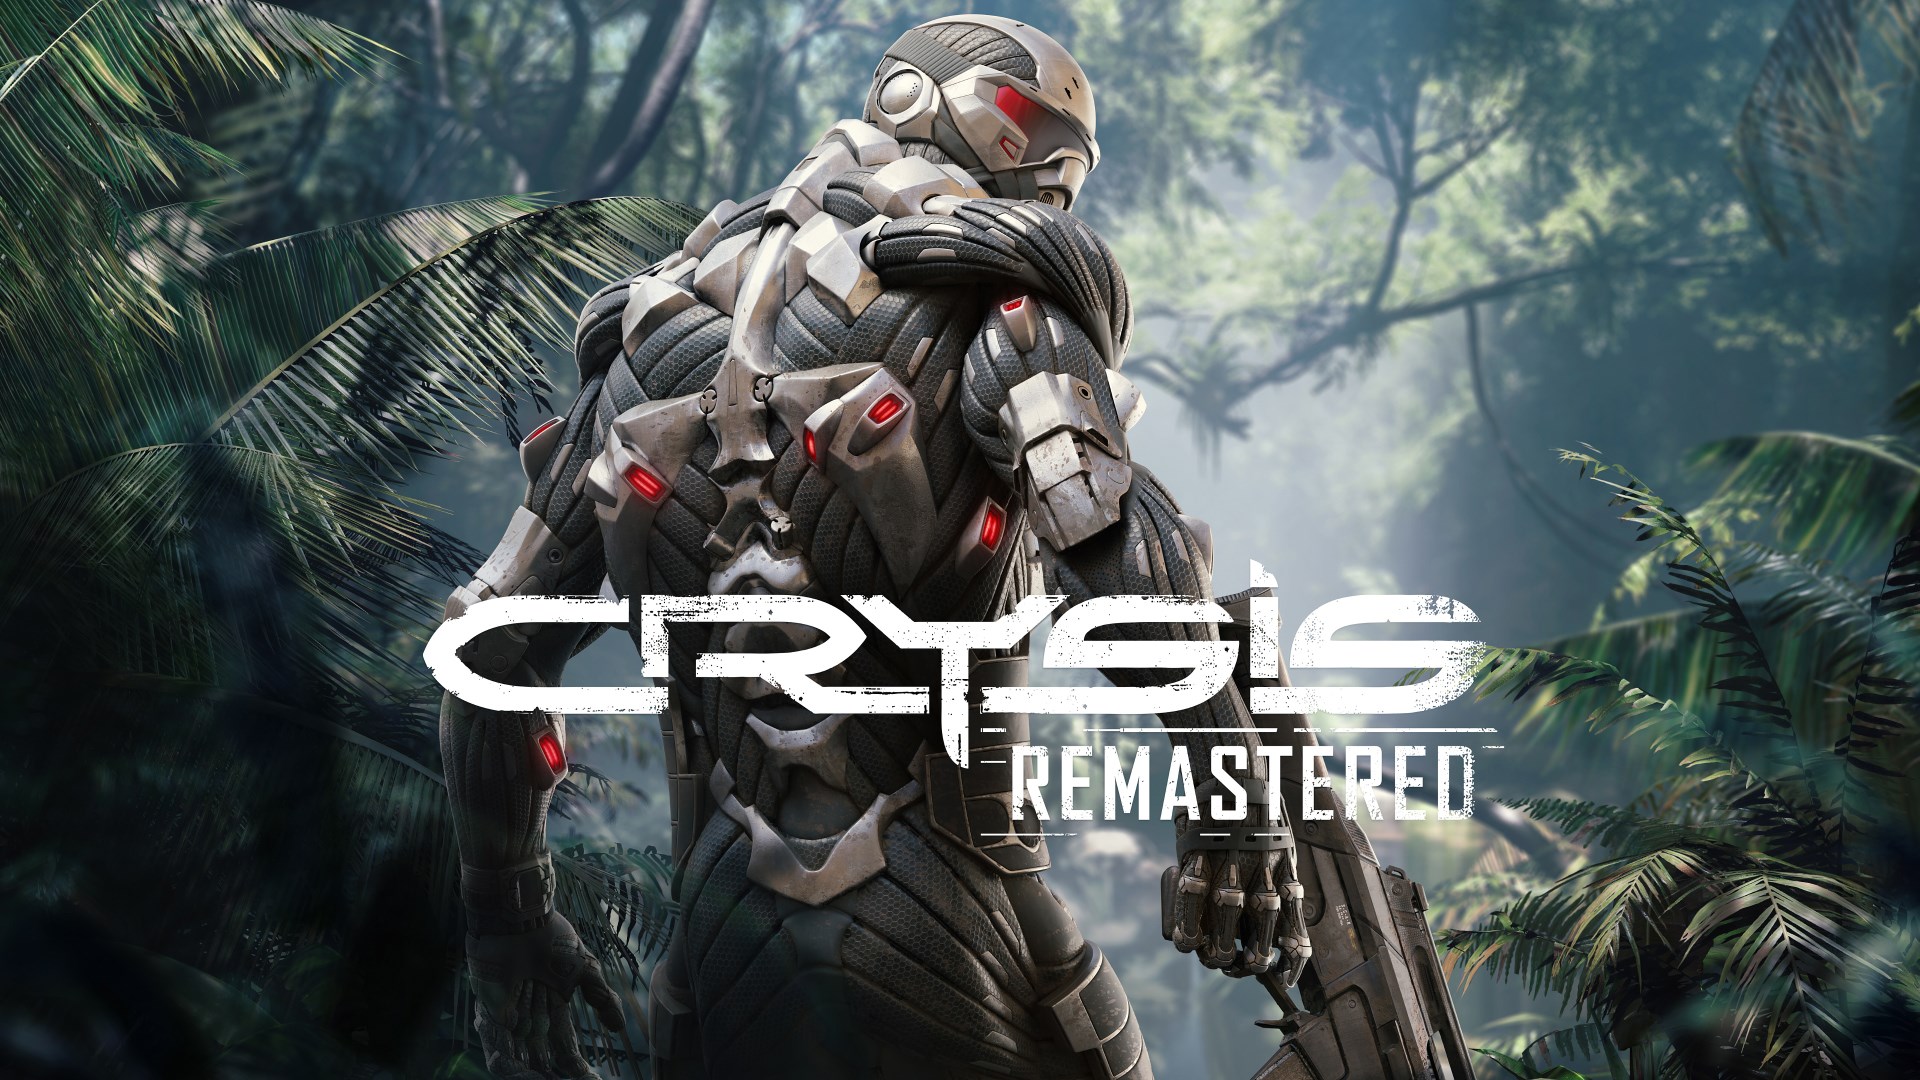 New Crysis Remastered PC Patch Offers Major GPU and CPU Performance Improvements